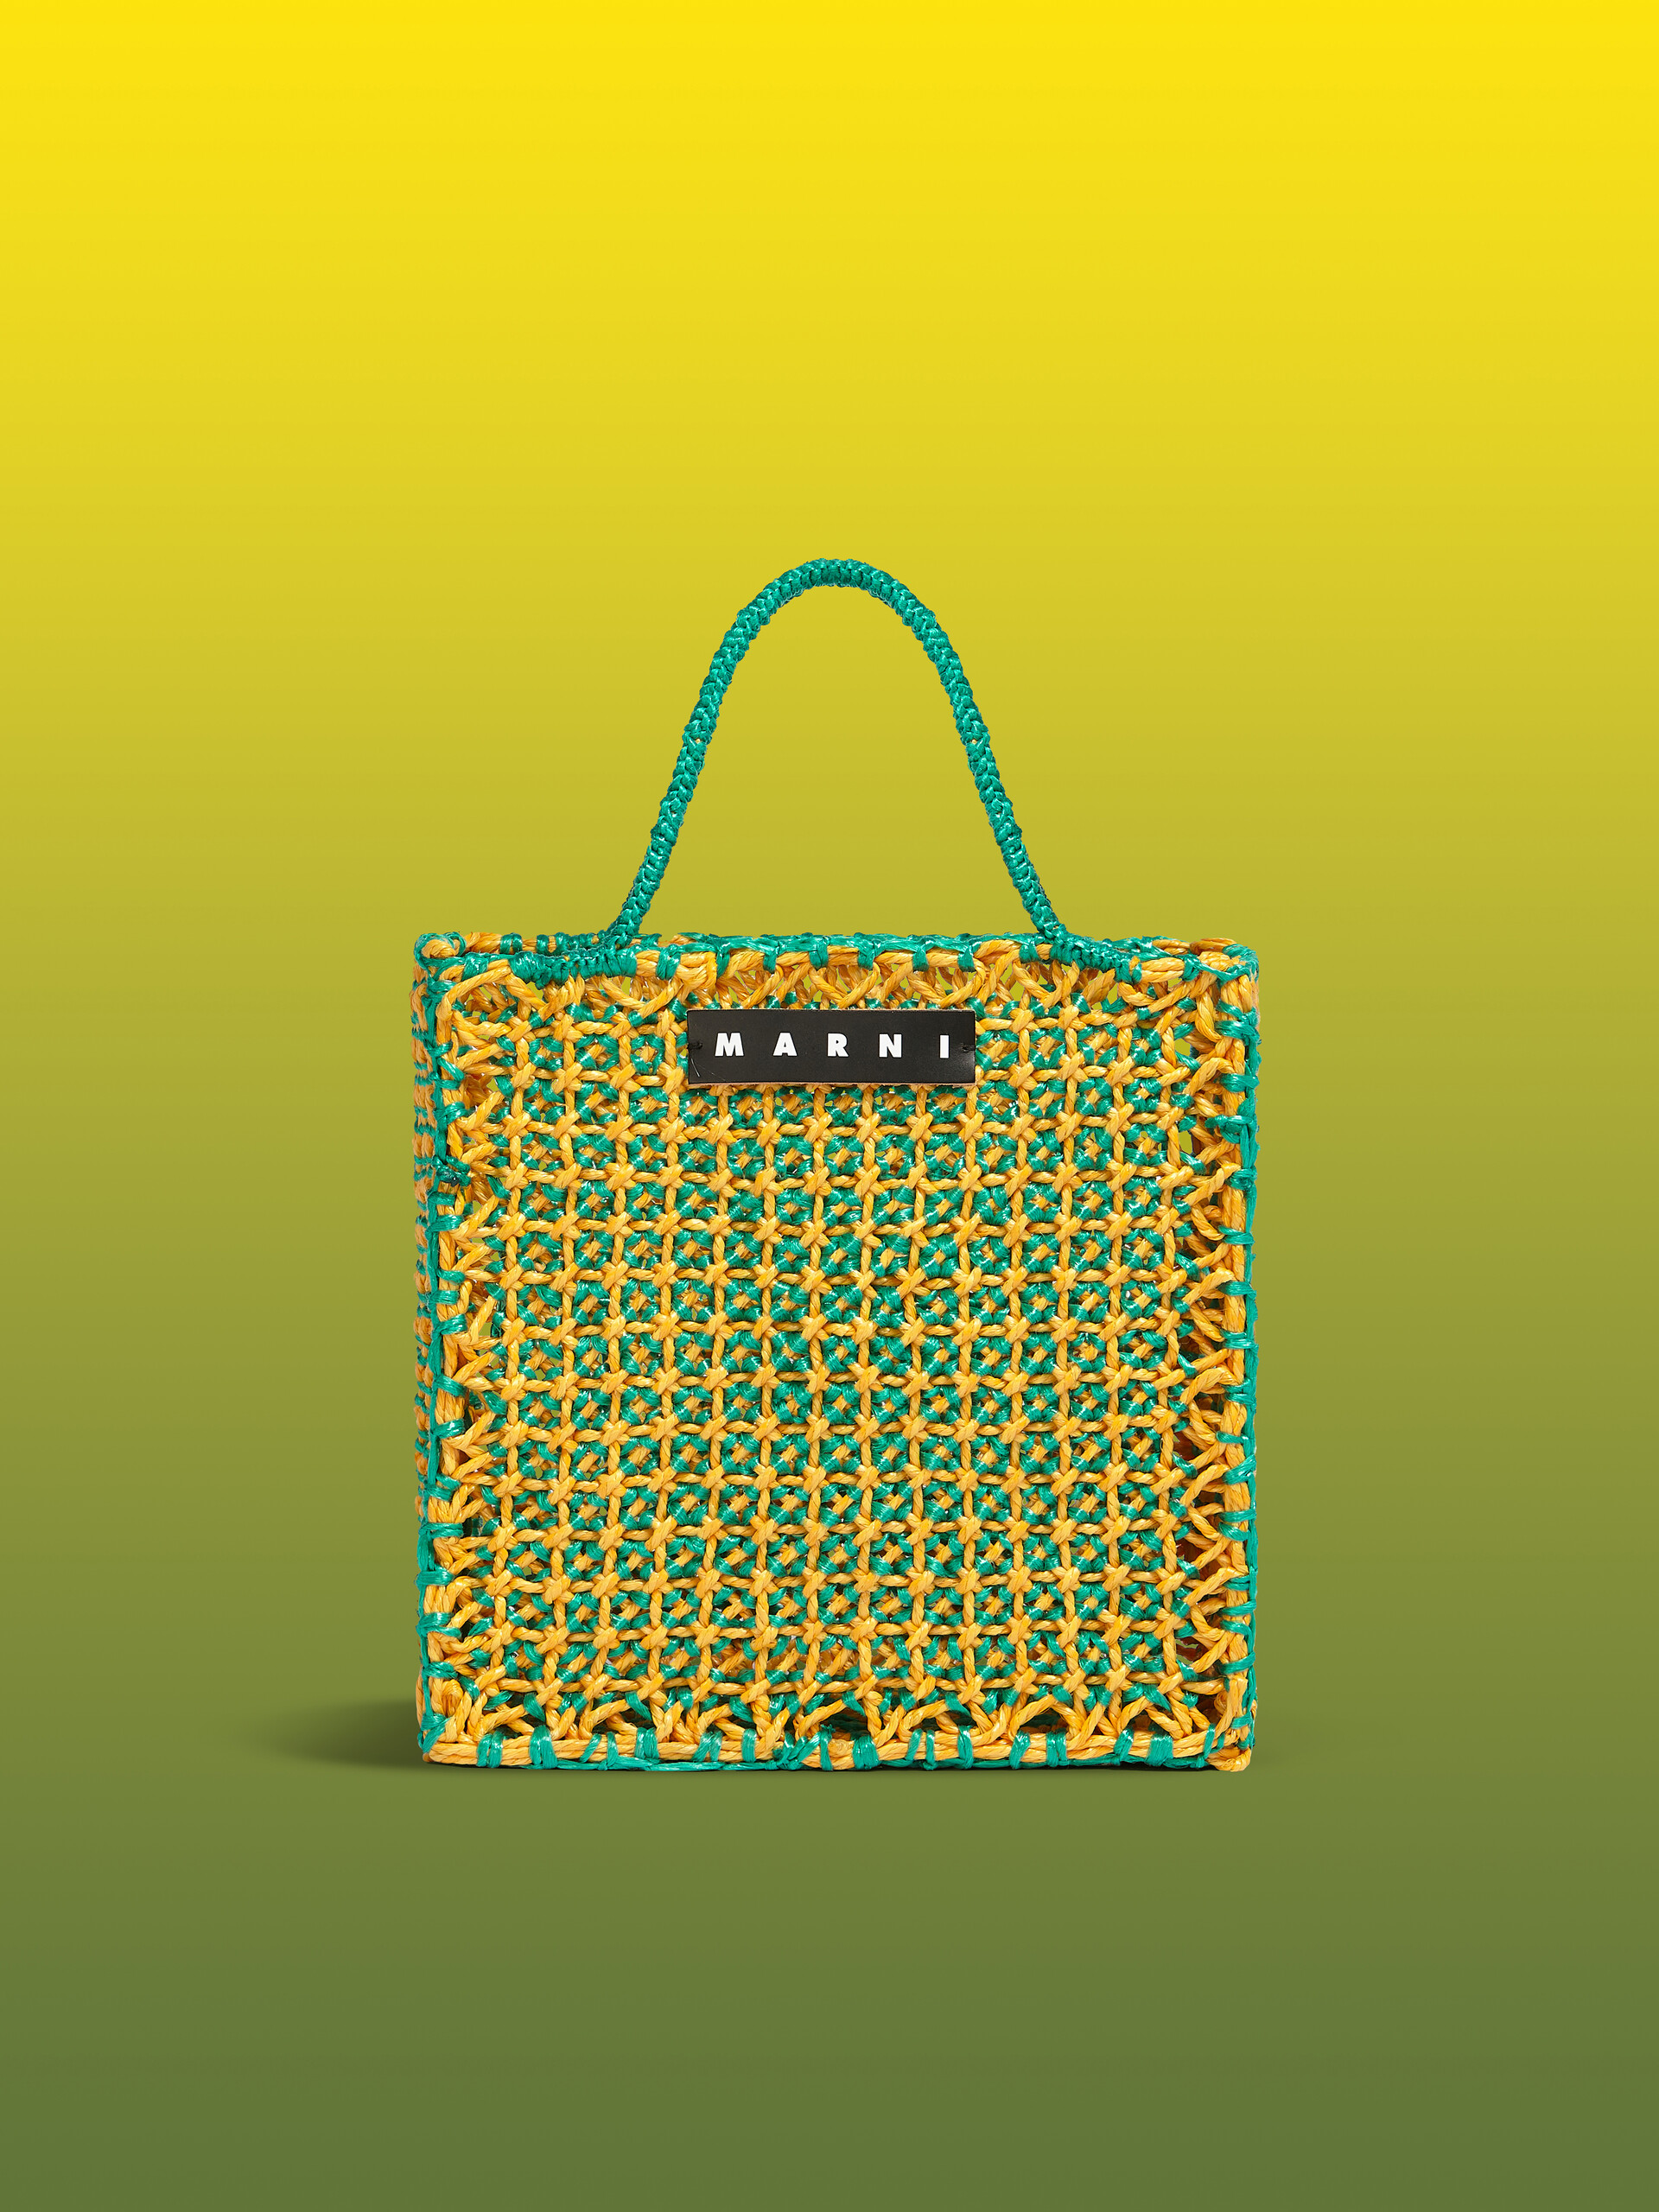 MARNI MARKET large bag in green and yellow crochet - Bags - Image 1